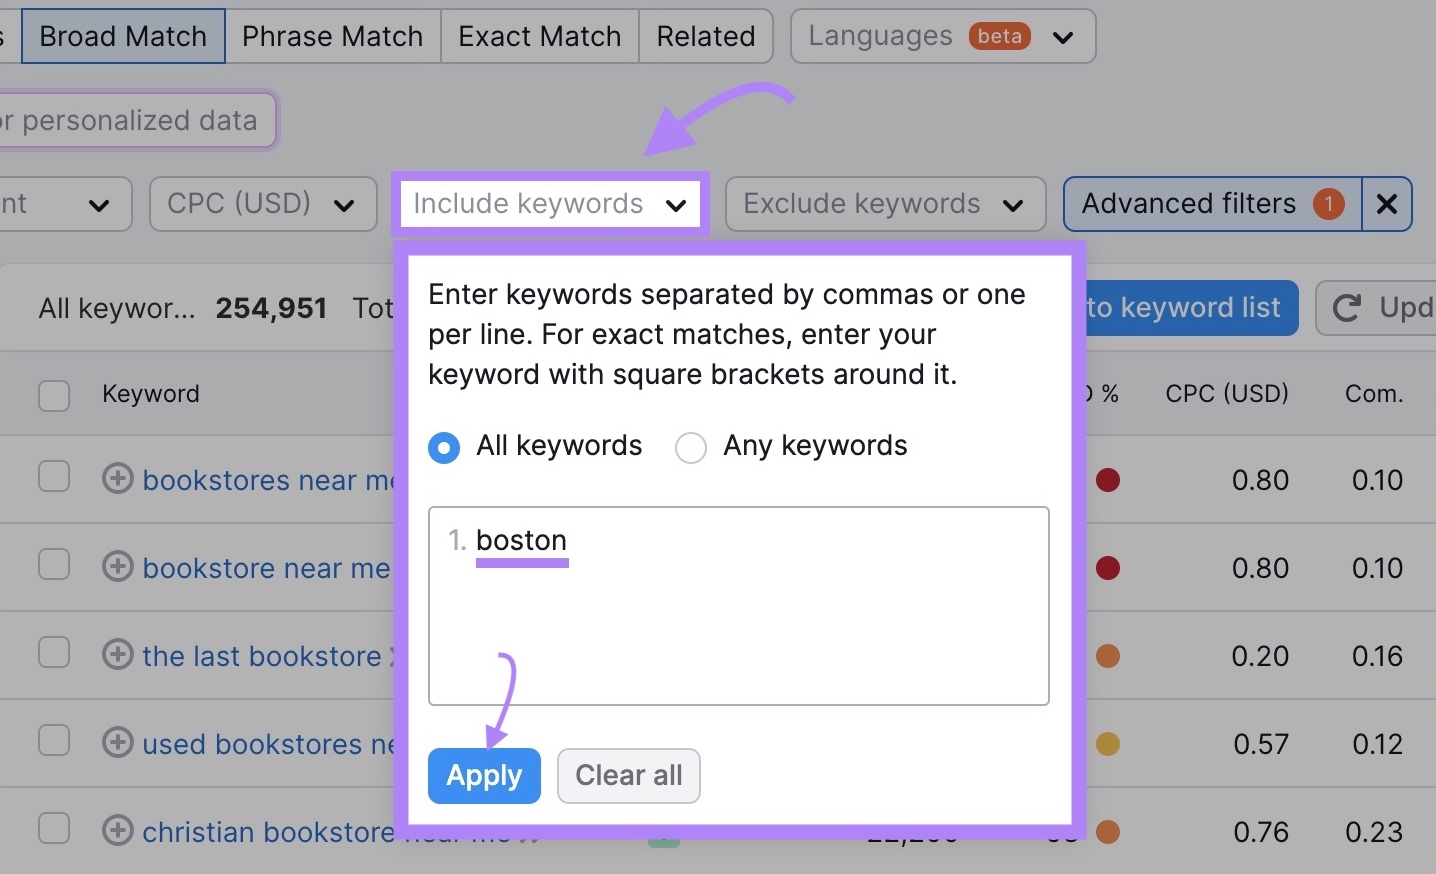 "Include keywords dropdown opened with "Boston" entered and "Apply" clicked.